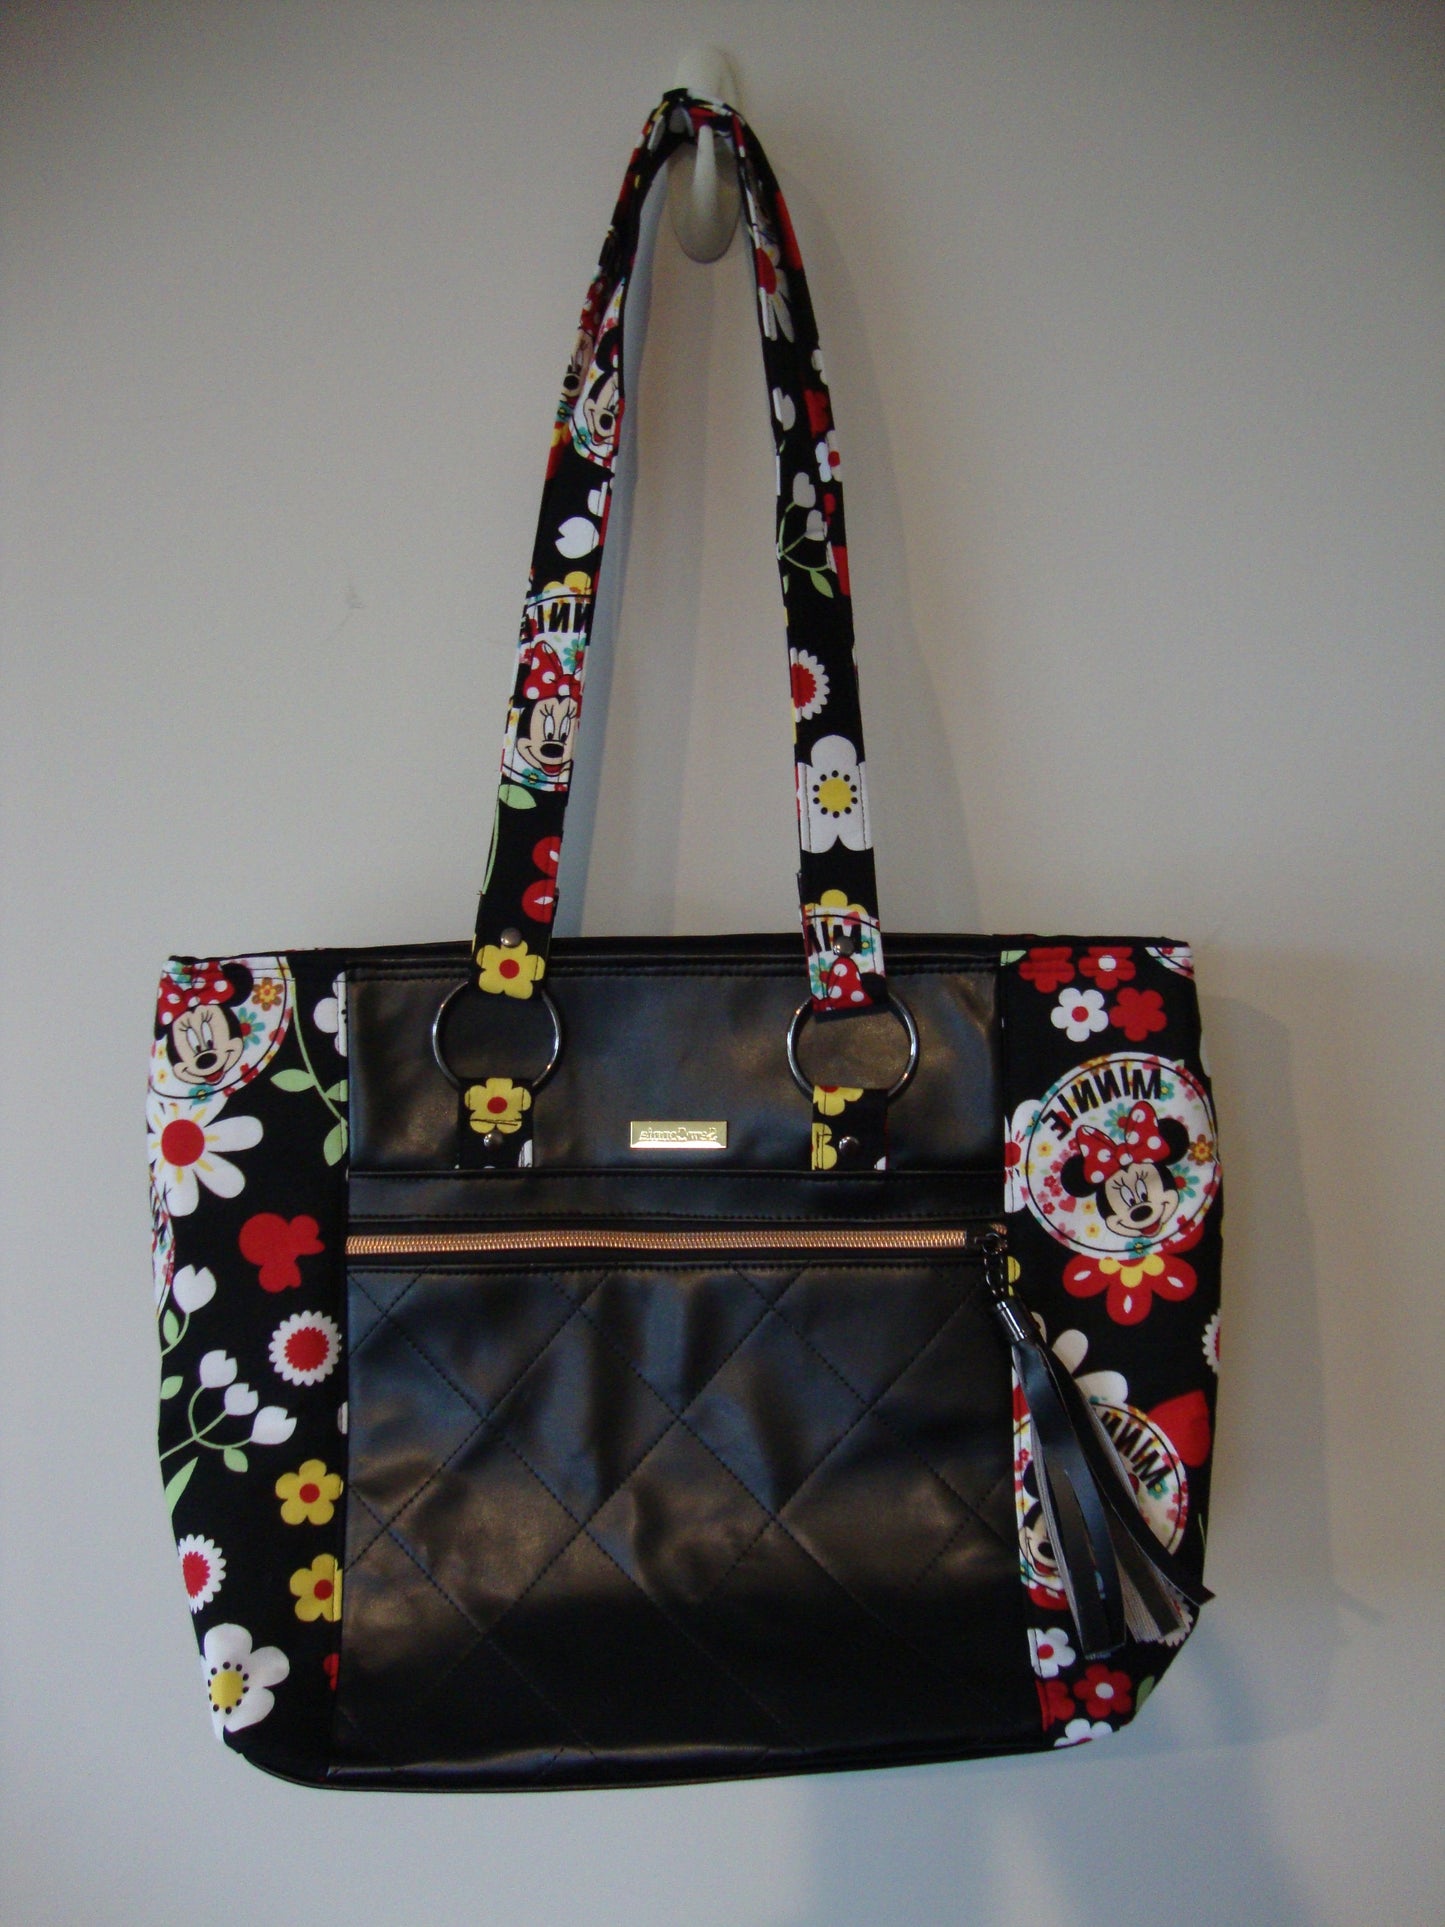 Minnie Mouse with Black Vinyl Tote Bag